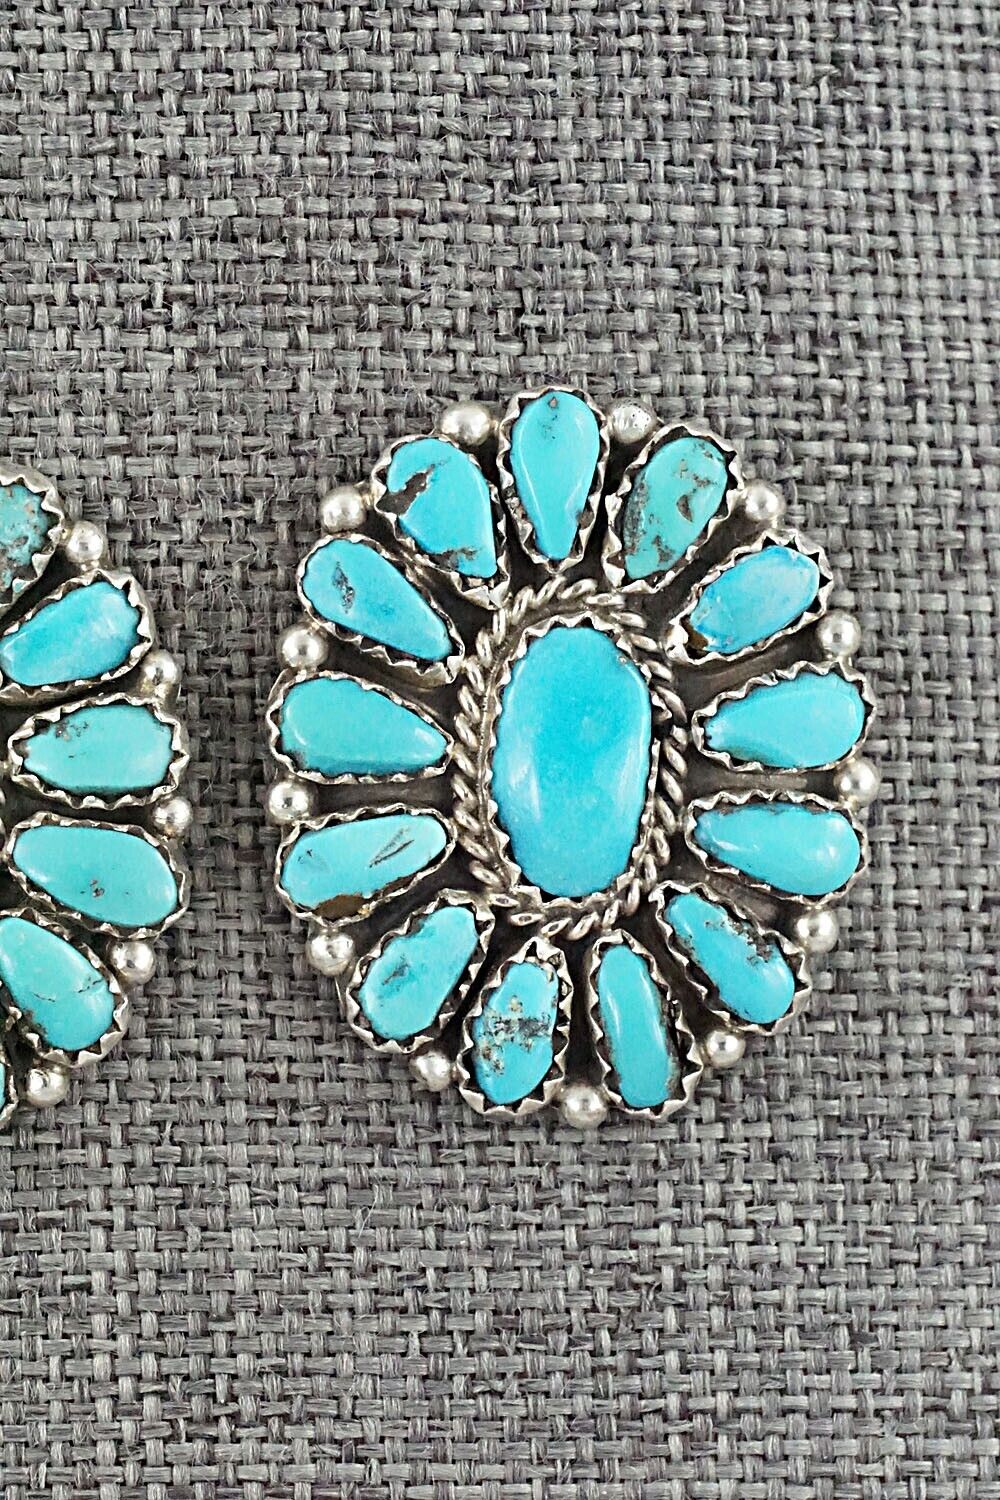 Turquoise & Sterling Silver Earrings - Justina Wilson